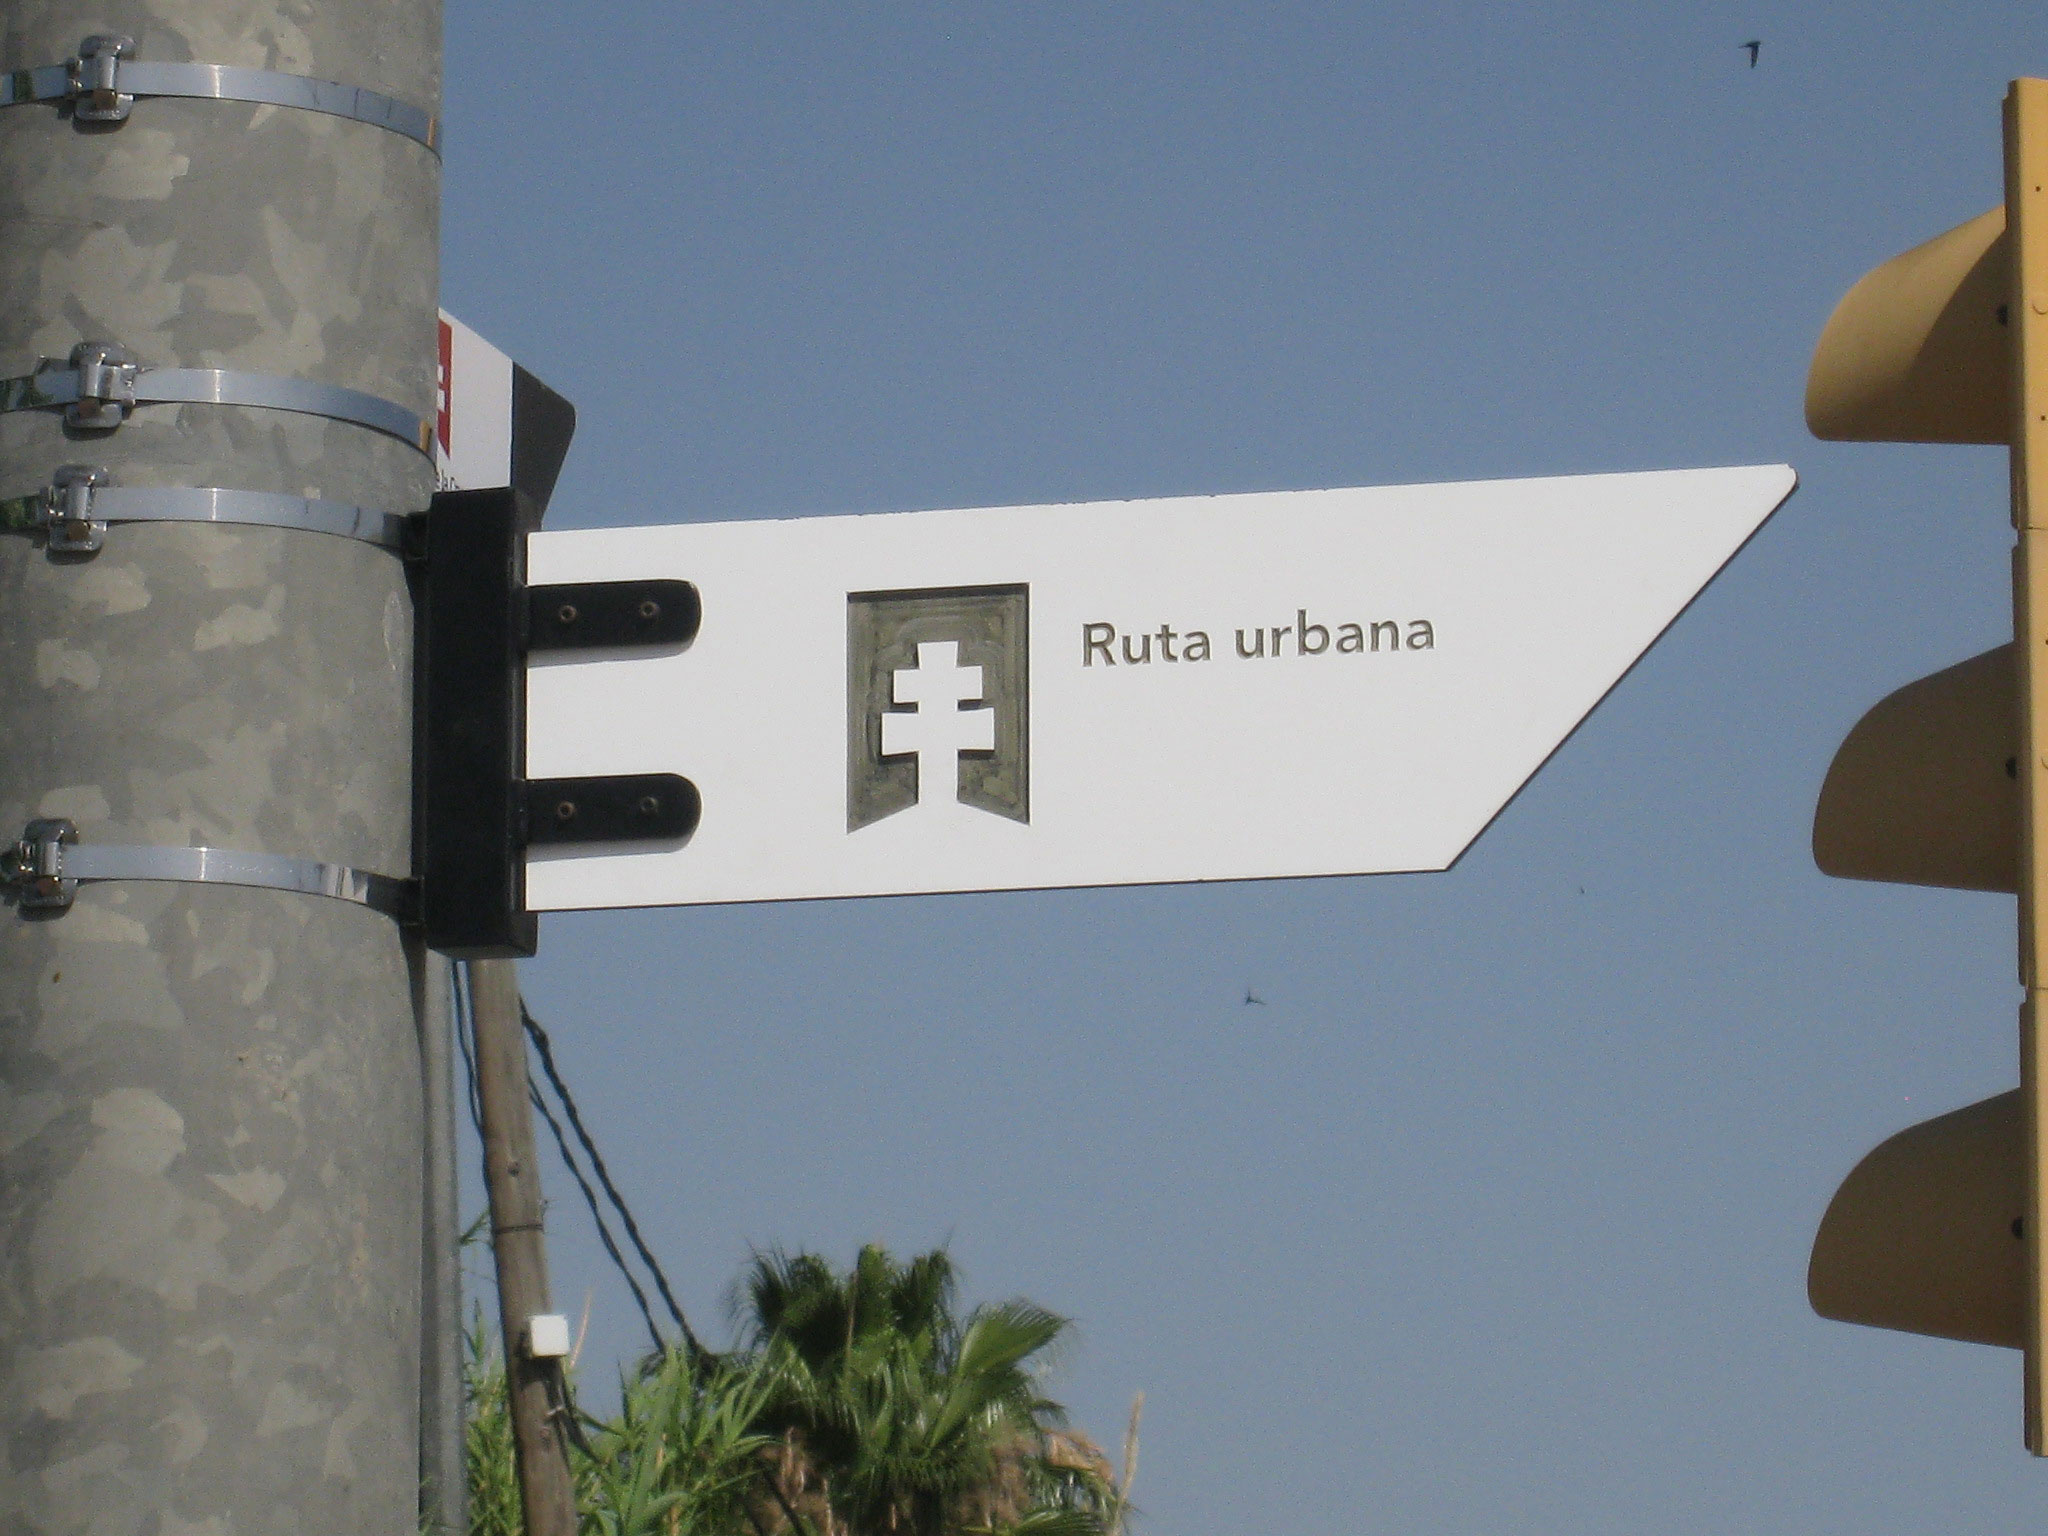 Arrow indicating the start point of the route